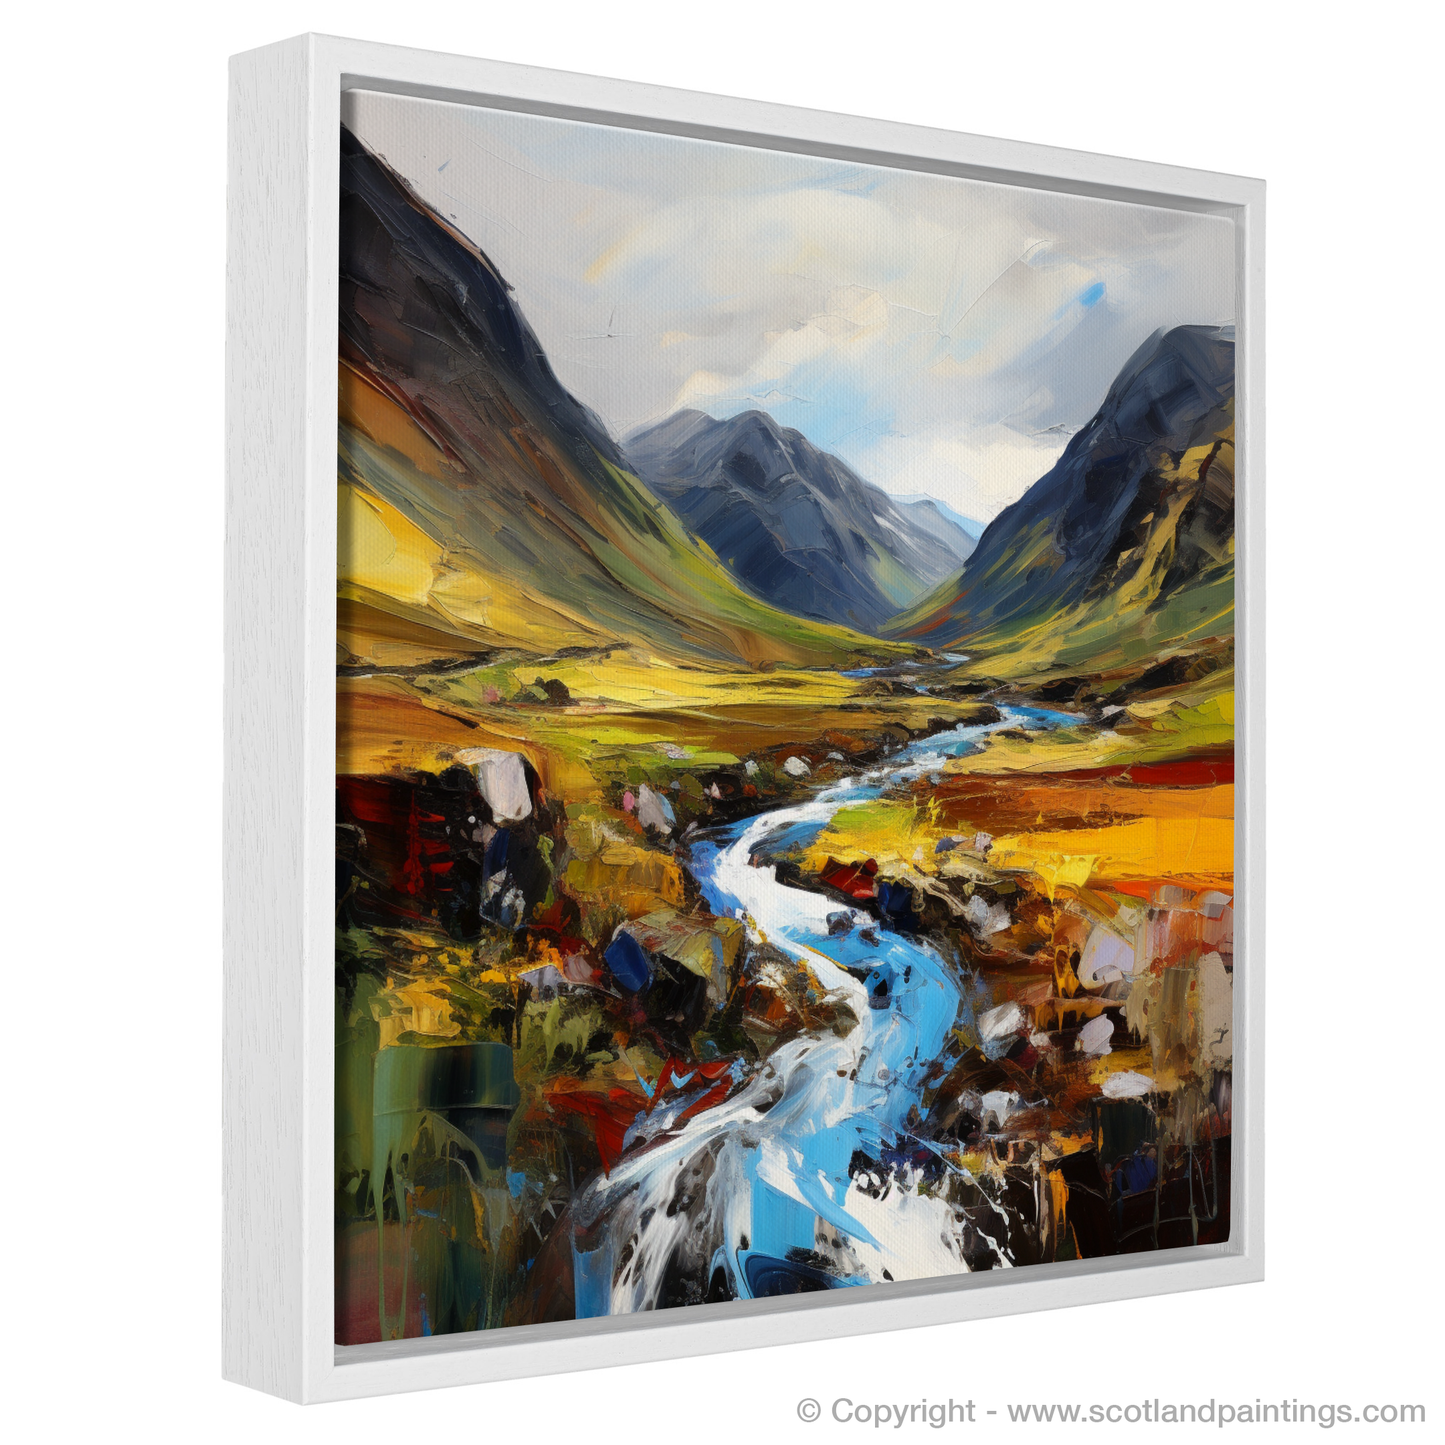 Painting and Art Print of Glen Nevis, Highlands entitled "Highland Vitality: An Expressionist Ode to Glen Nevis".